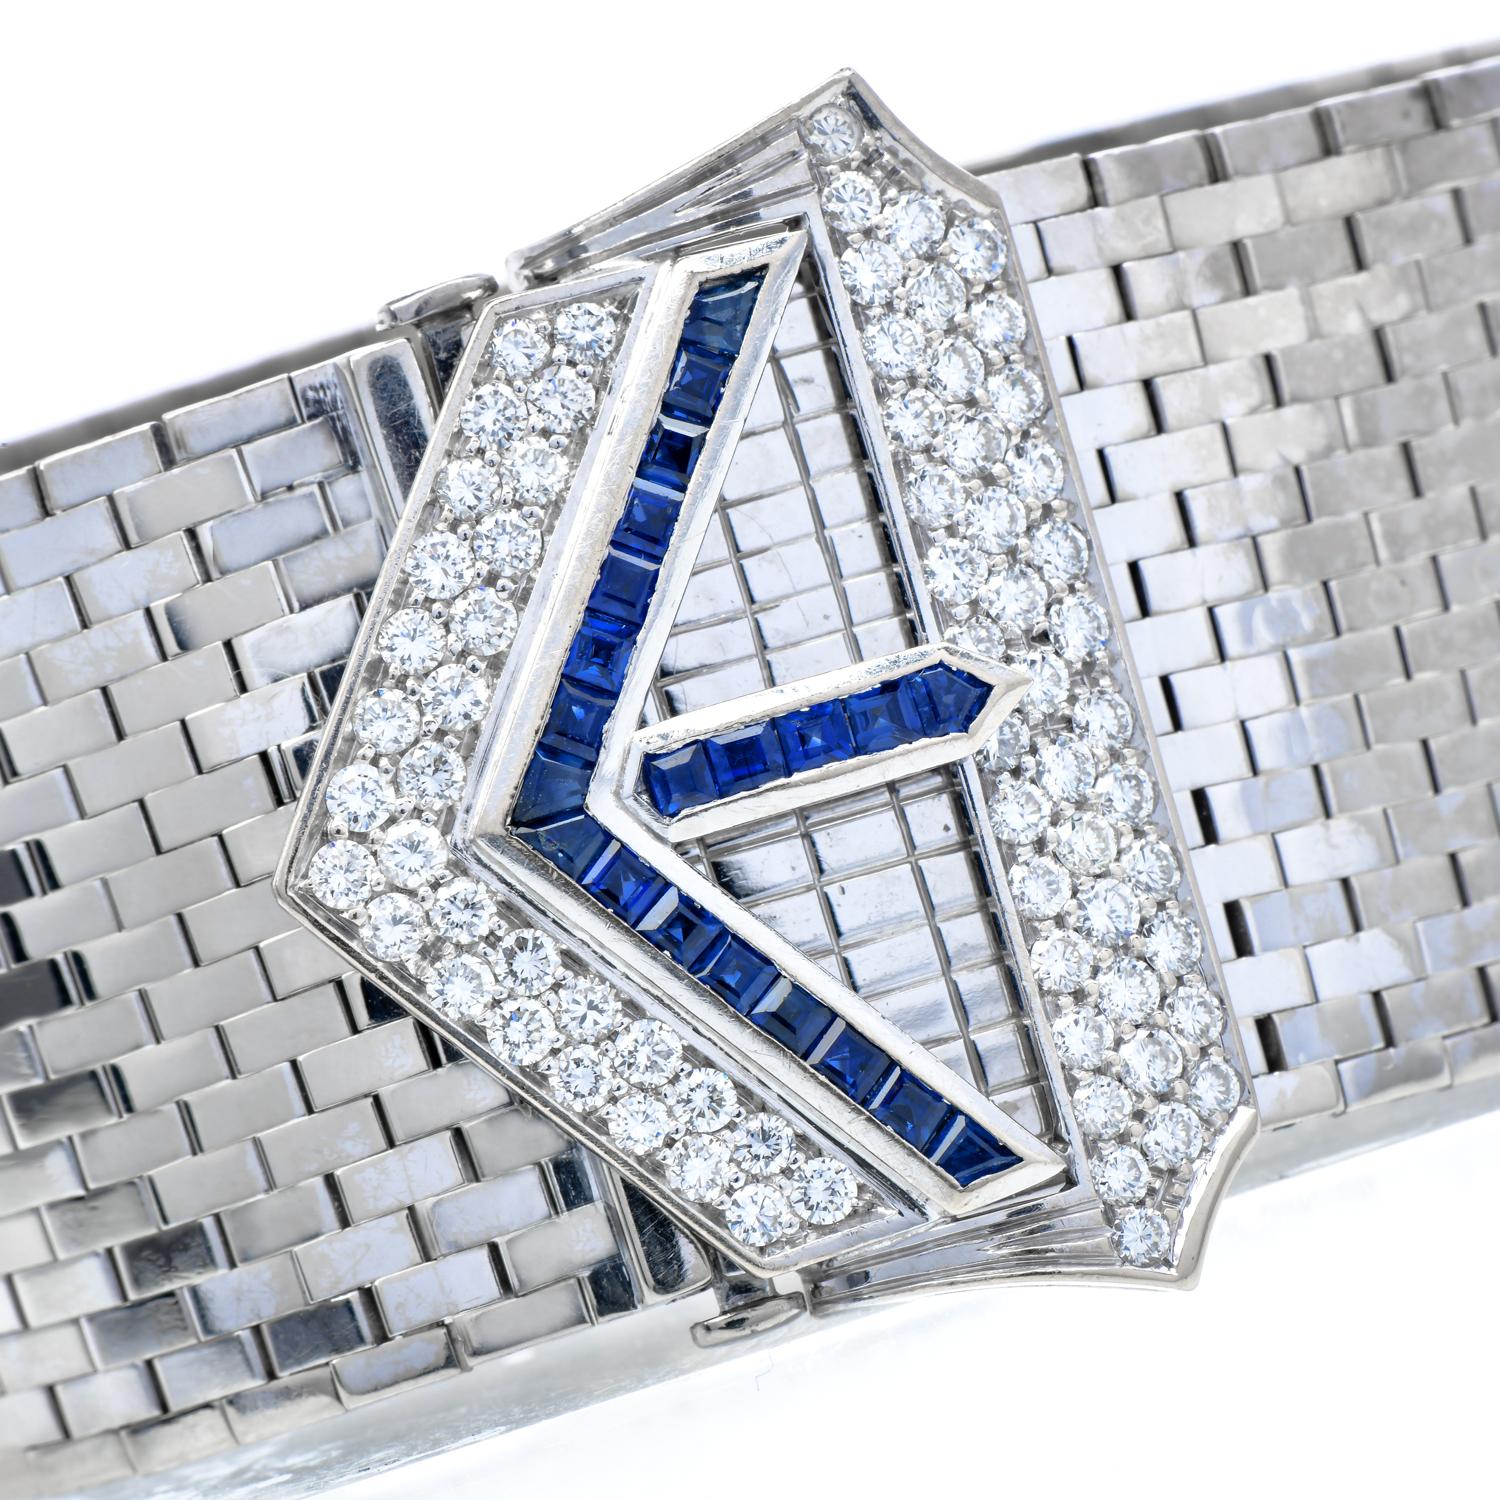 This opulent Vintage retro wide bracelet is crafted in 18-karat white gold, weighing 64.9 grams, measuring 7.3